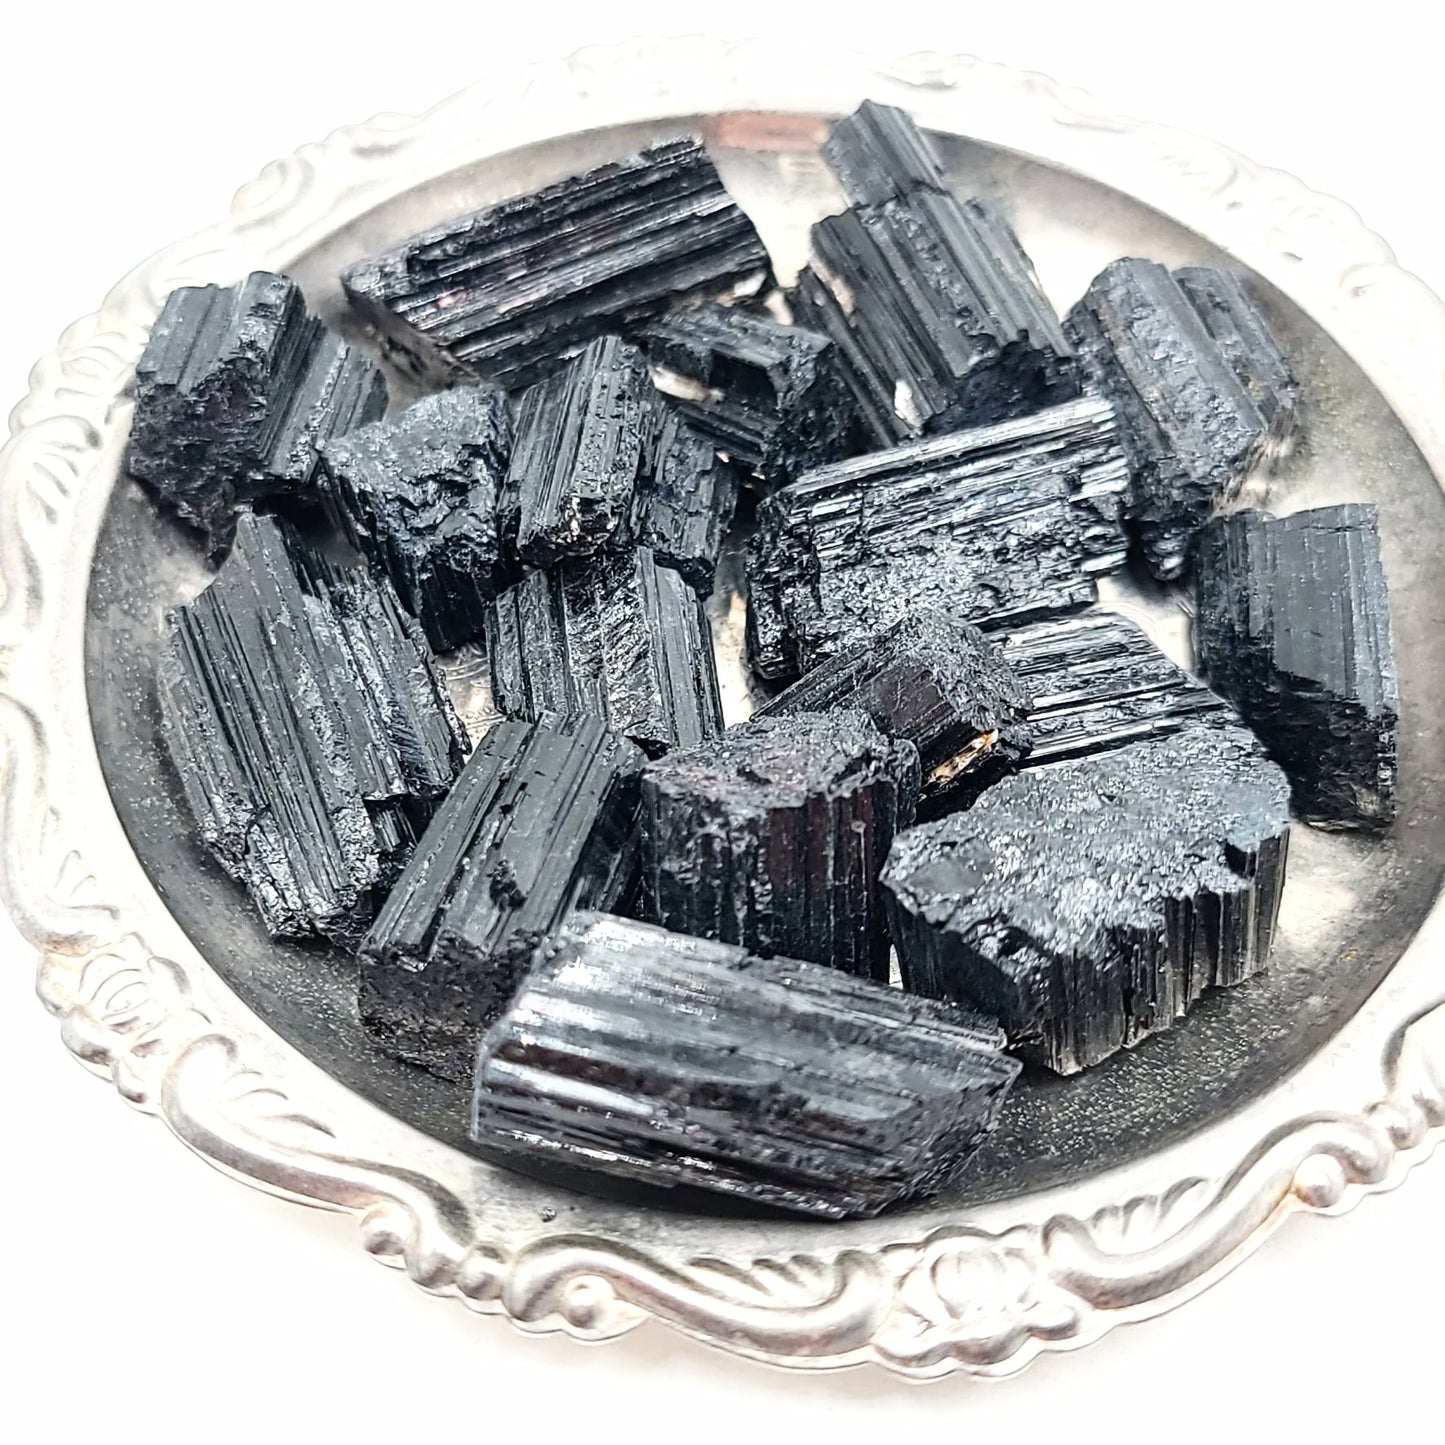 Black Tourmaline Rough Stone High Quality "Small" - Elevated Metaphysical